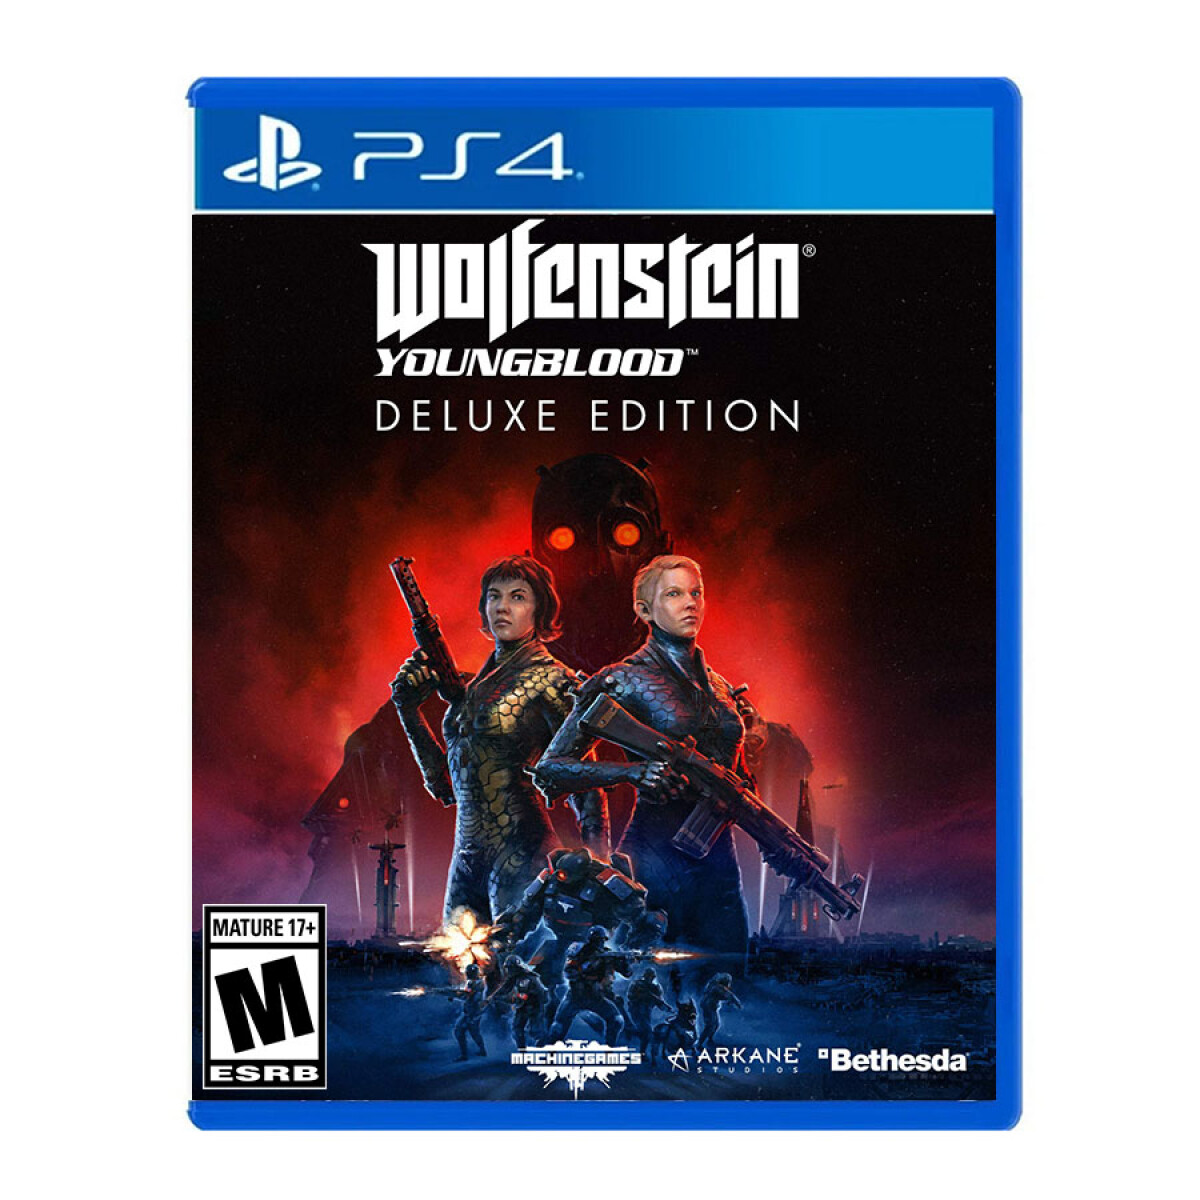 Wolfenstein: Youngblood Deluxe Edition - PS4 